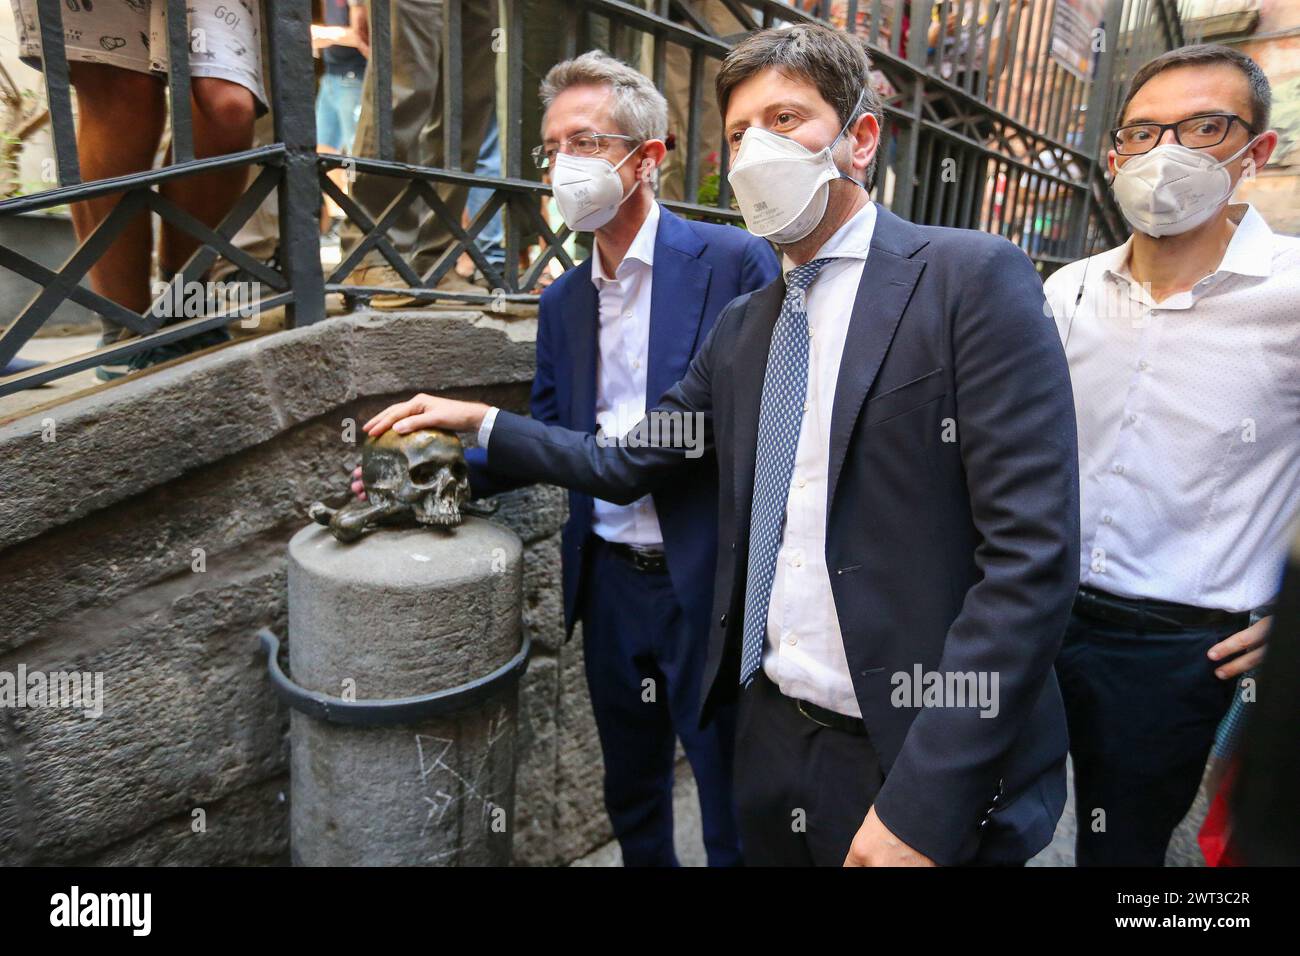 The minister of health, Roberto Speranza and the candidate for mayor of Naples Gaetano Manfredi, with a mask to protect themselves from Covid-19, touc Stock Photo